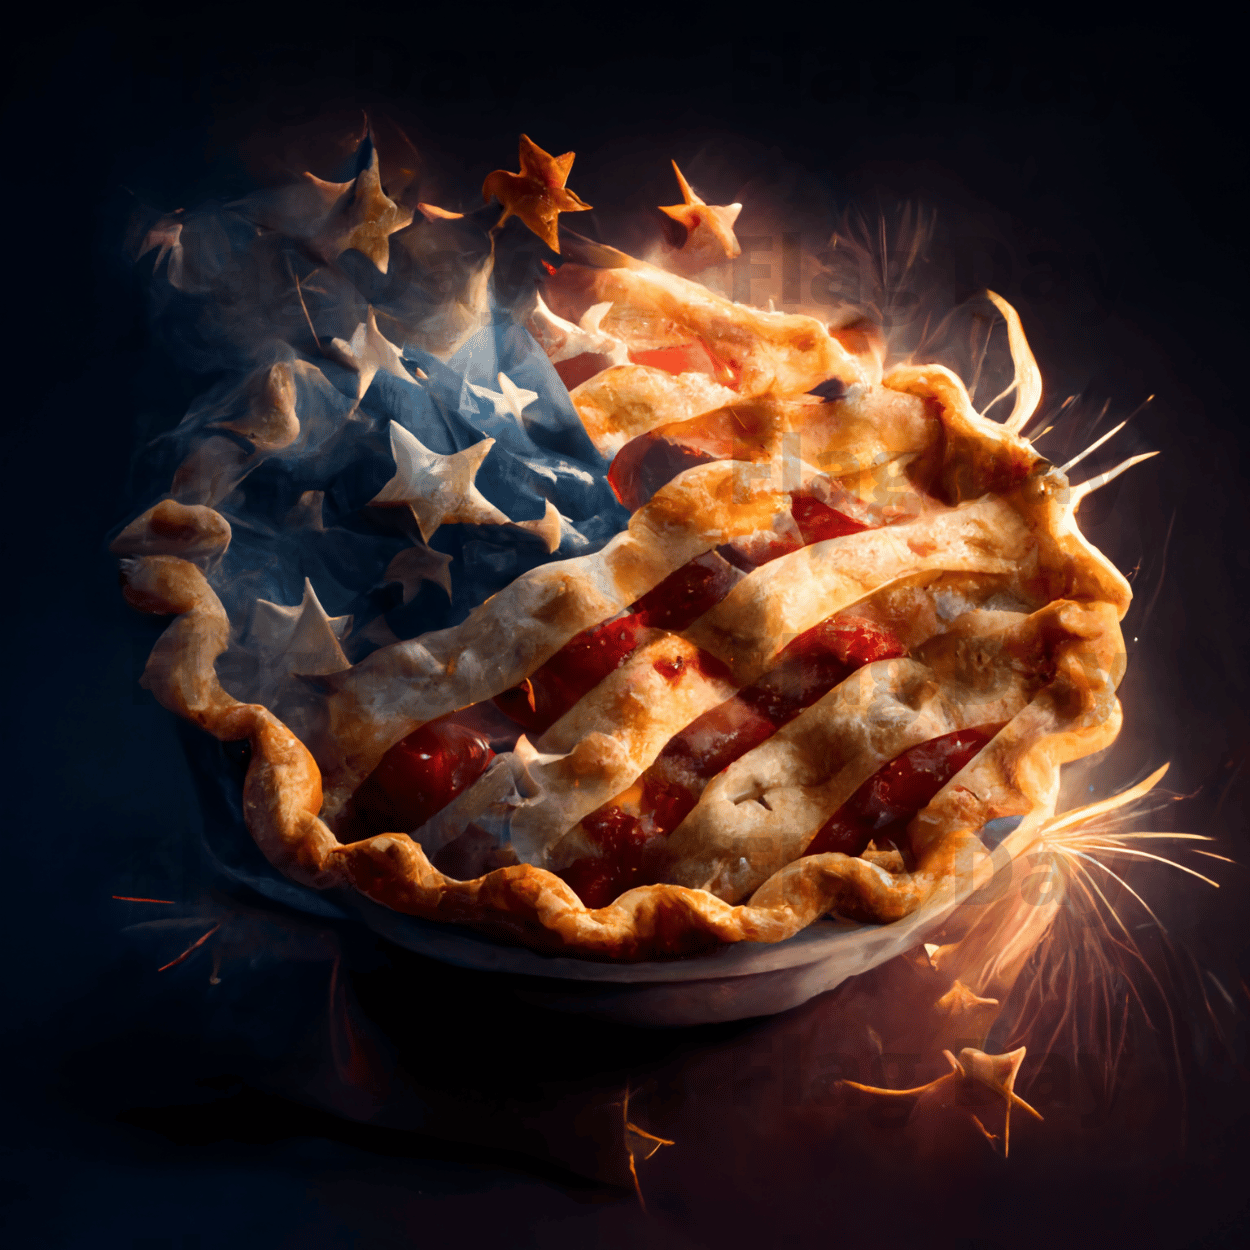 American Pie with Fireworks